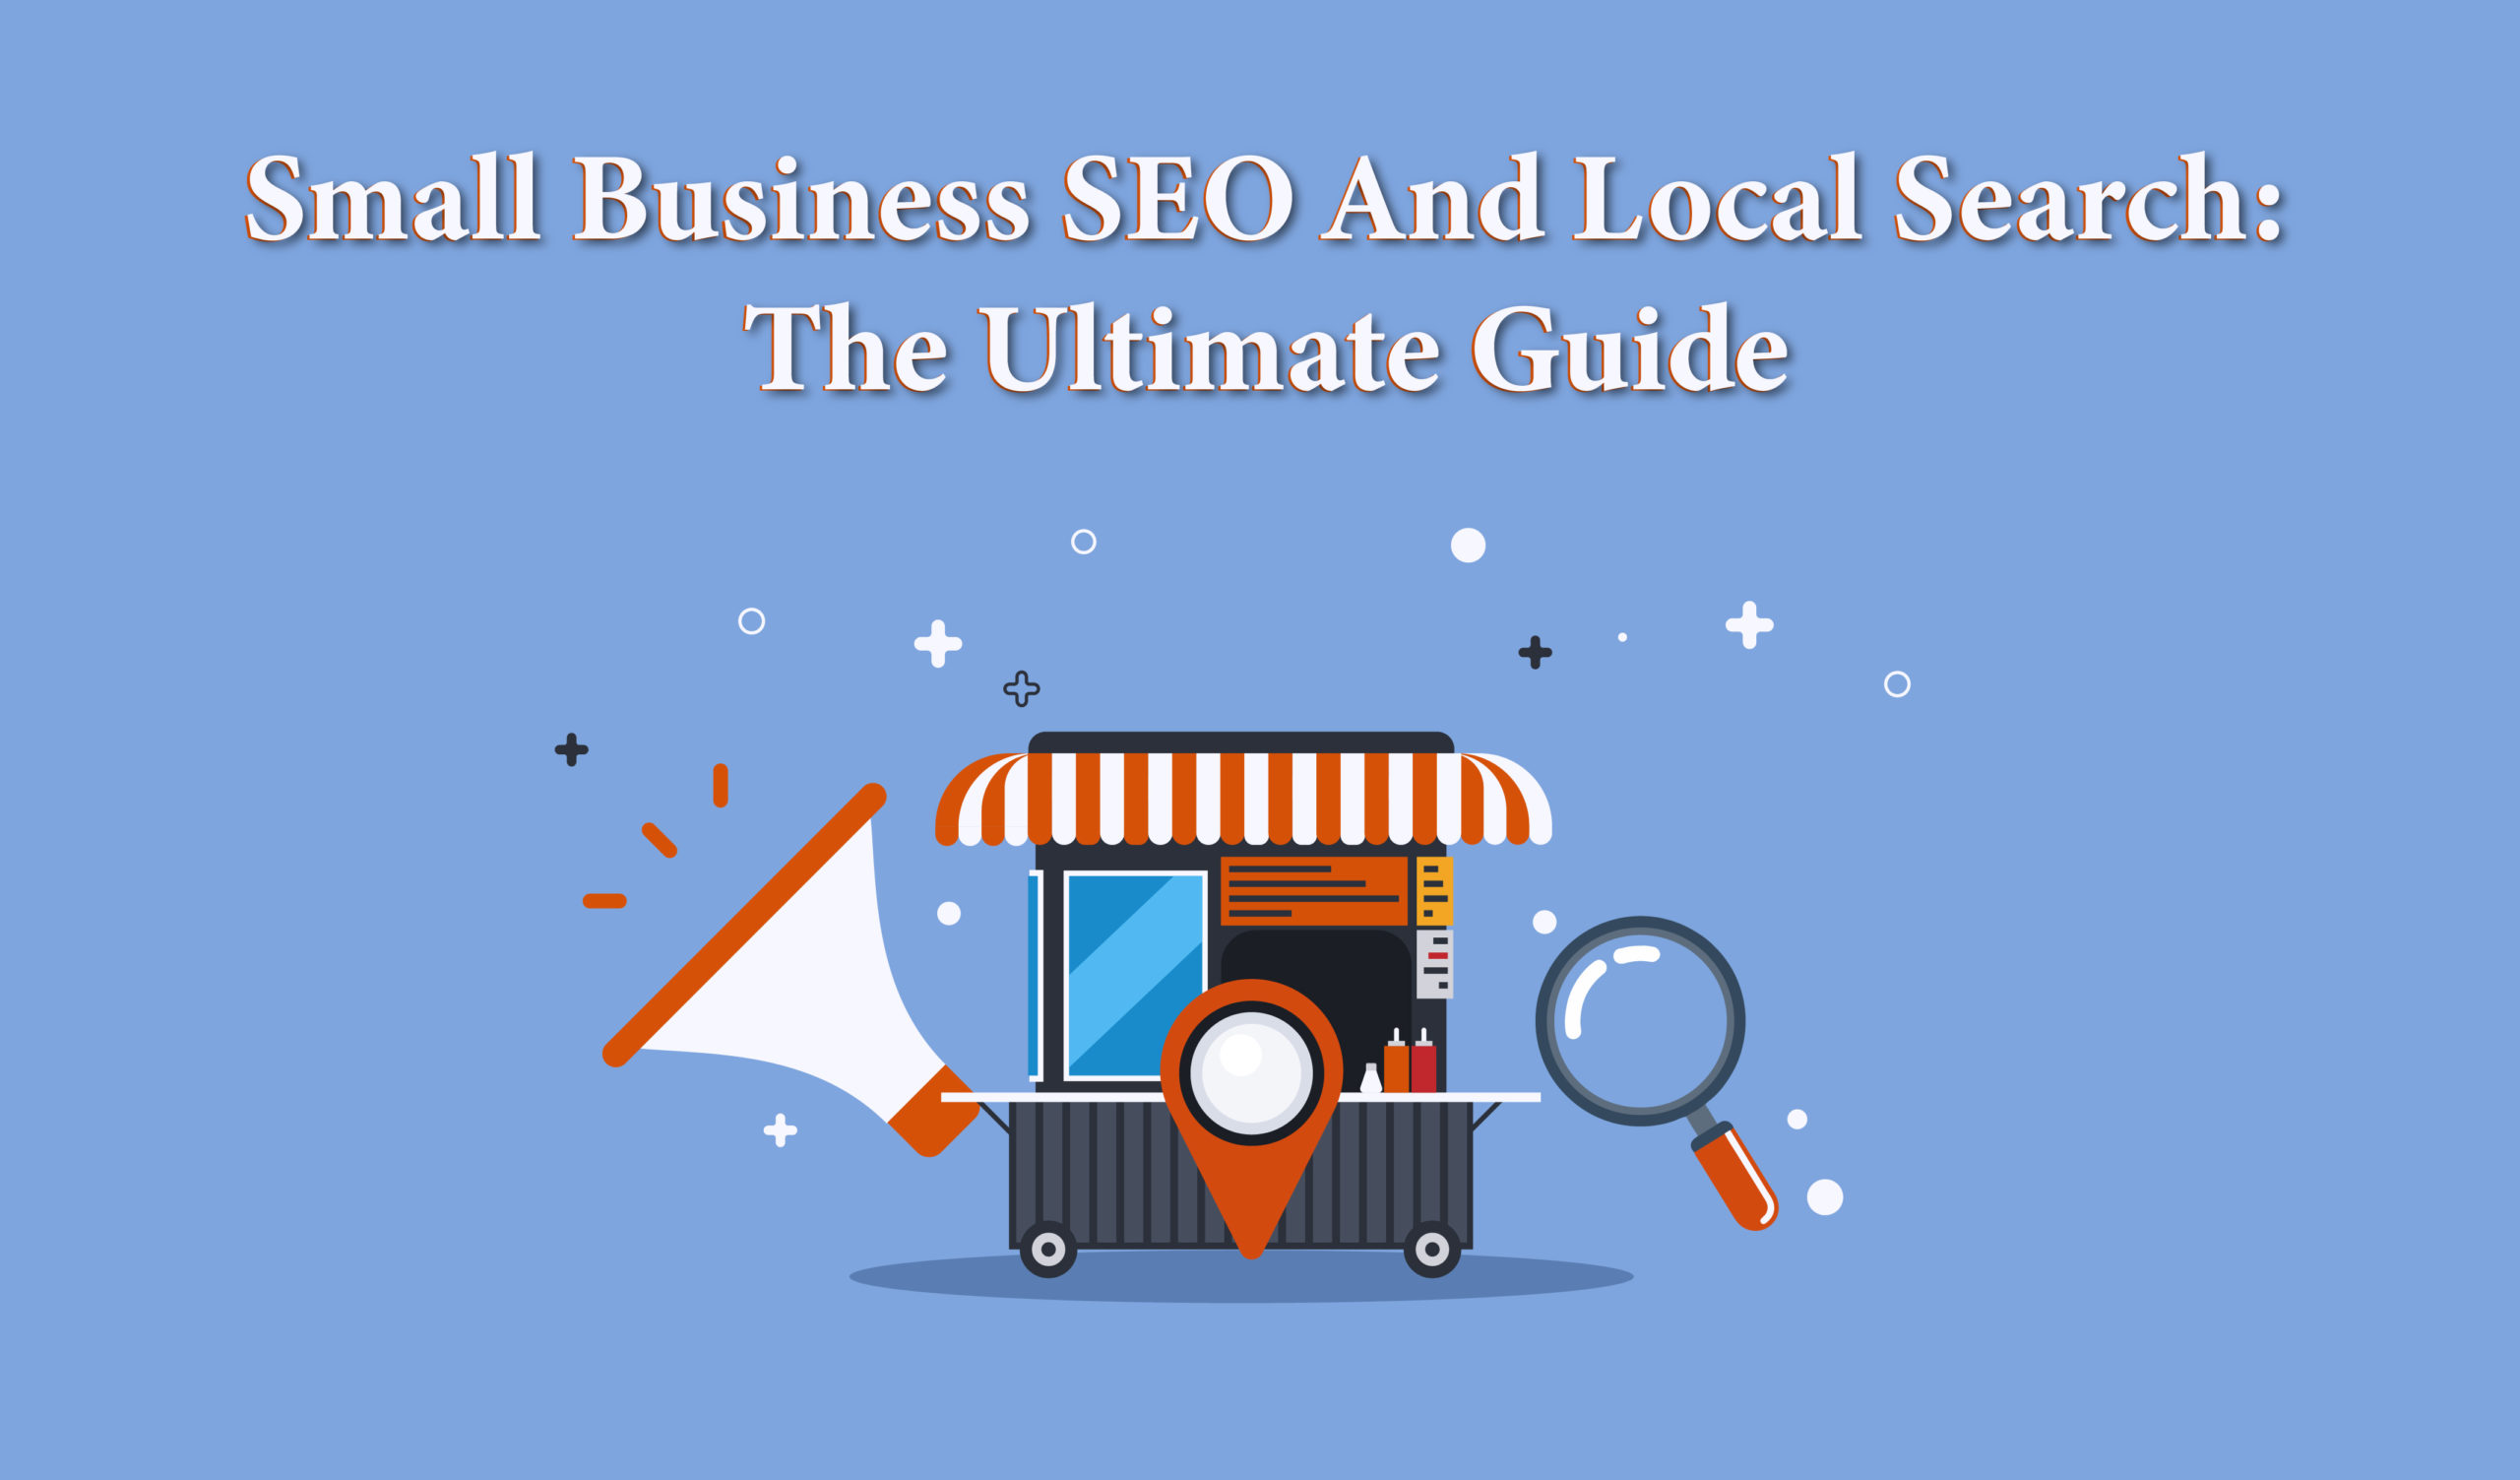 Small Business SEO and Local Search: The Ultimate guide